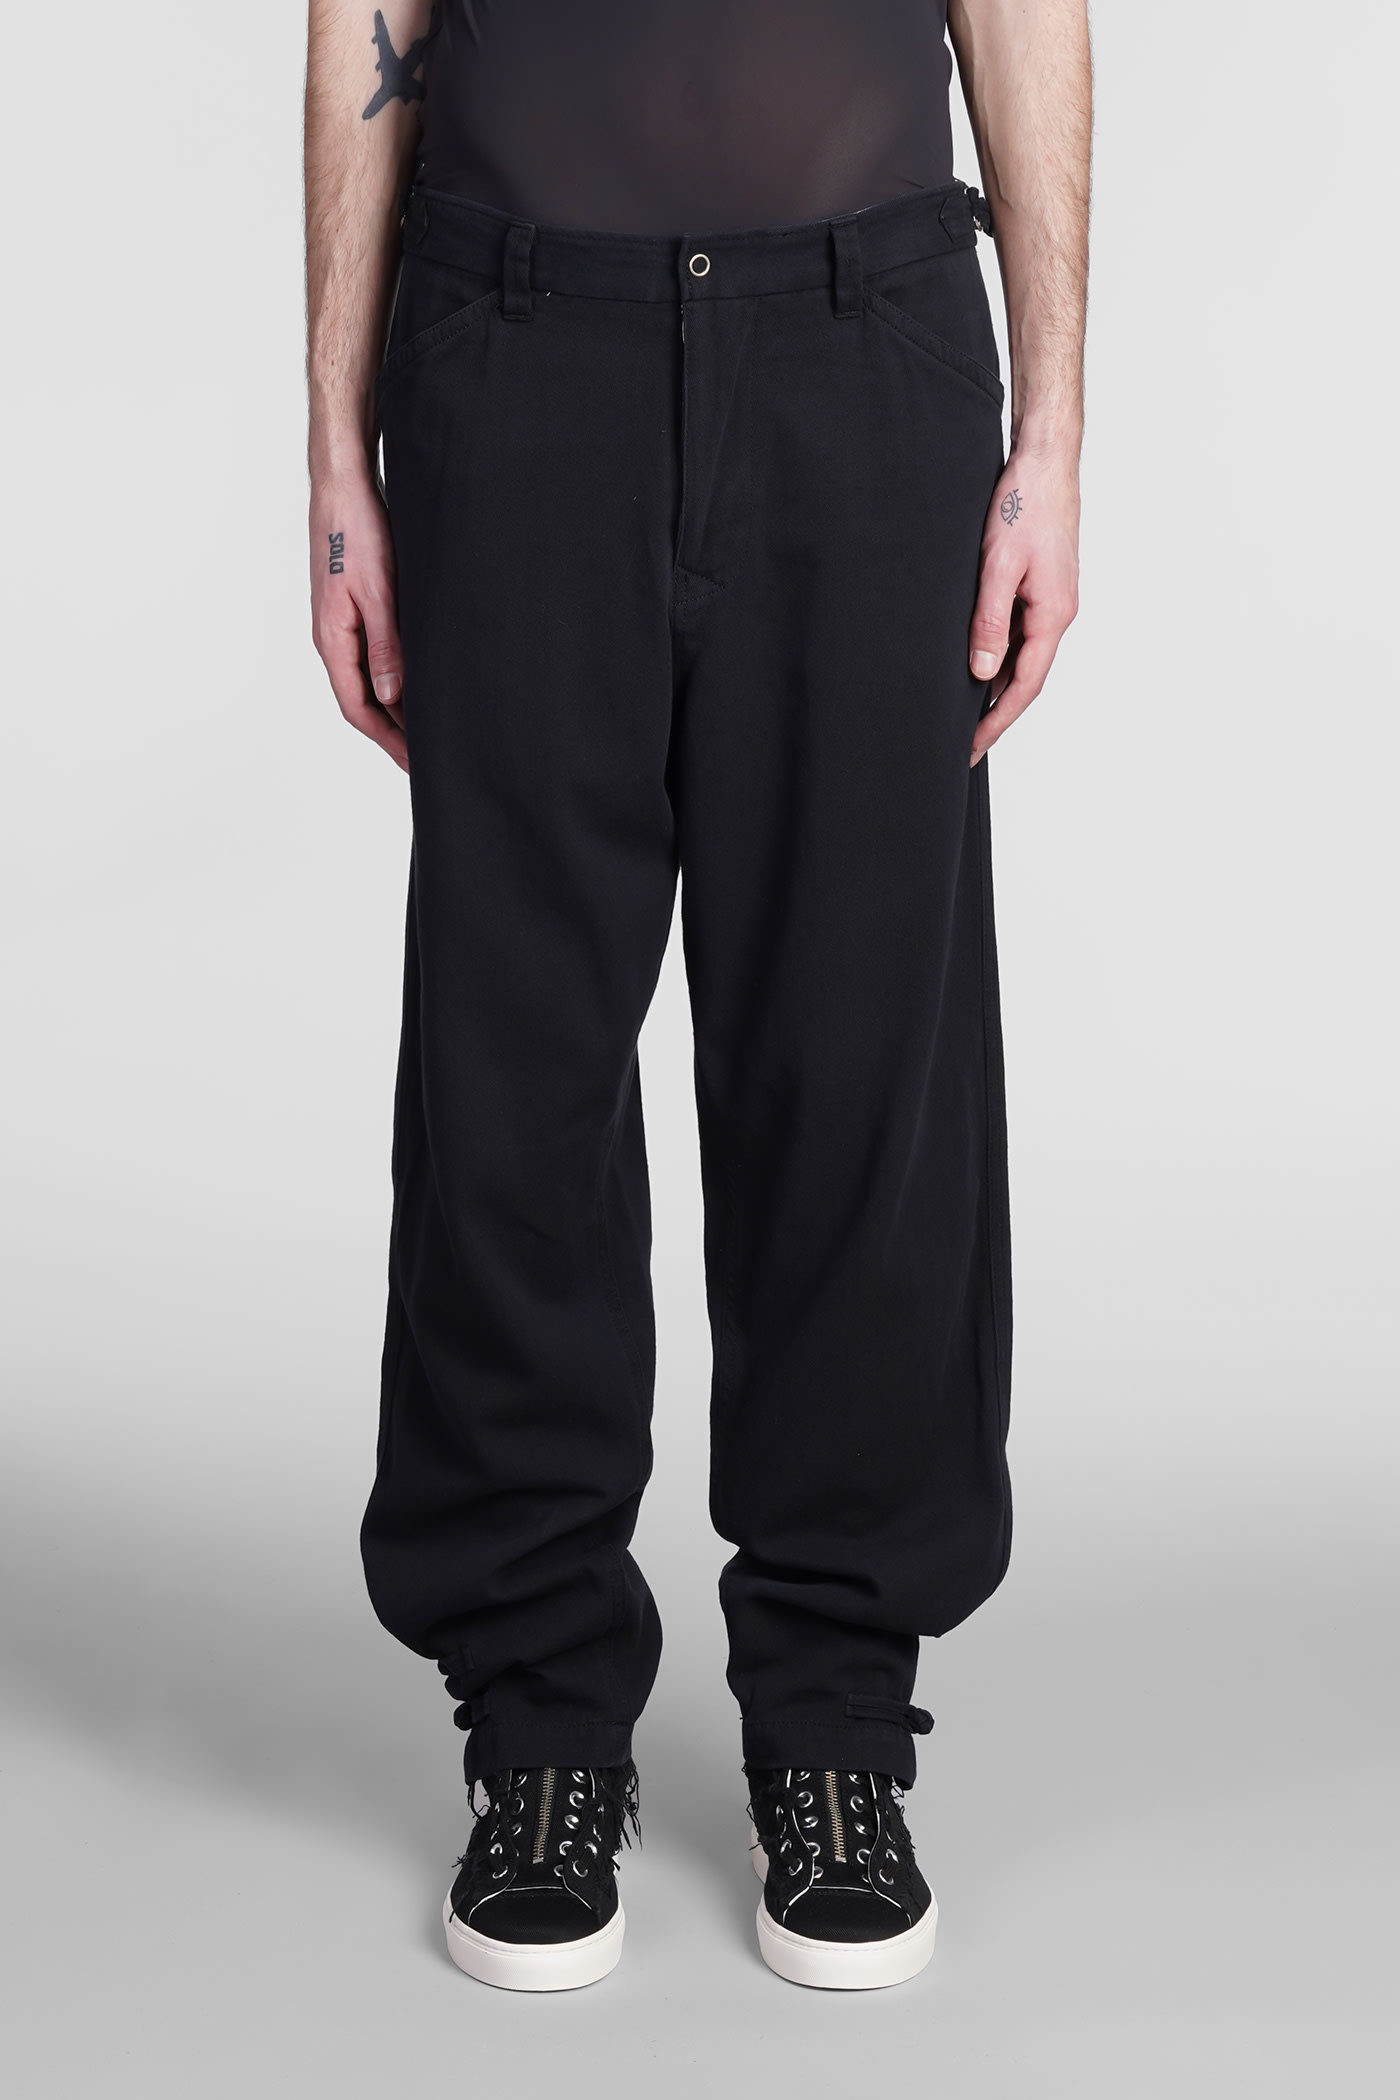 Undercover Pants In Black Cotton